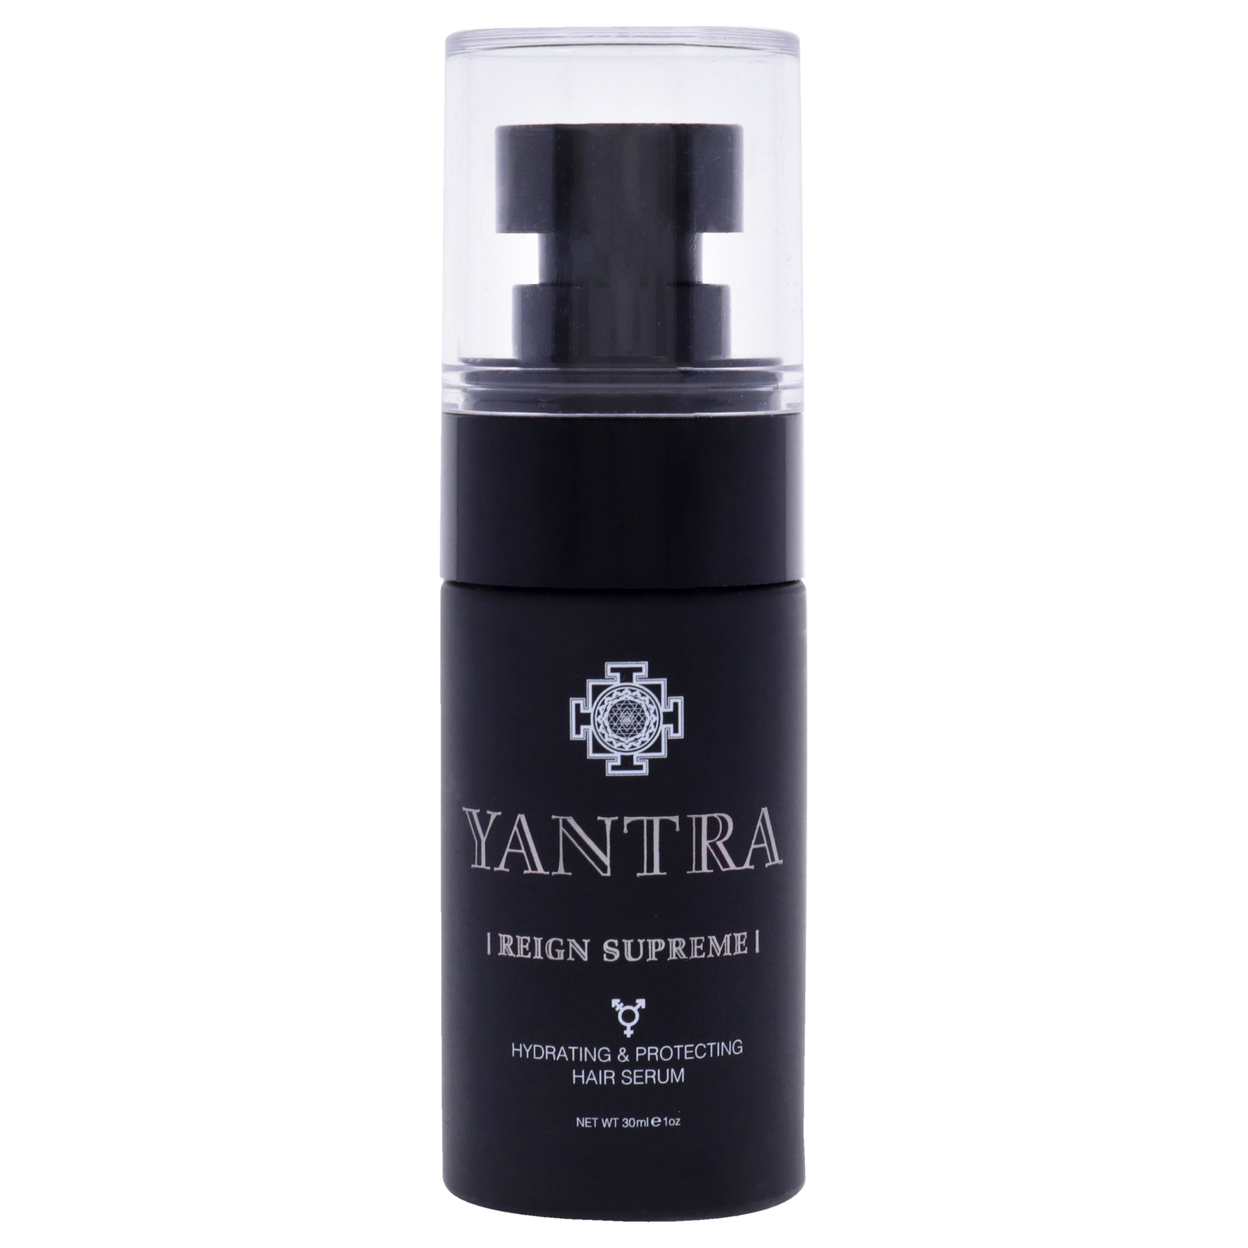 Yantra Reign Supreme Hydrating And Protecting Hair Serum 1 Oz